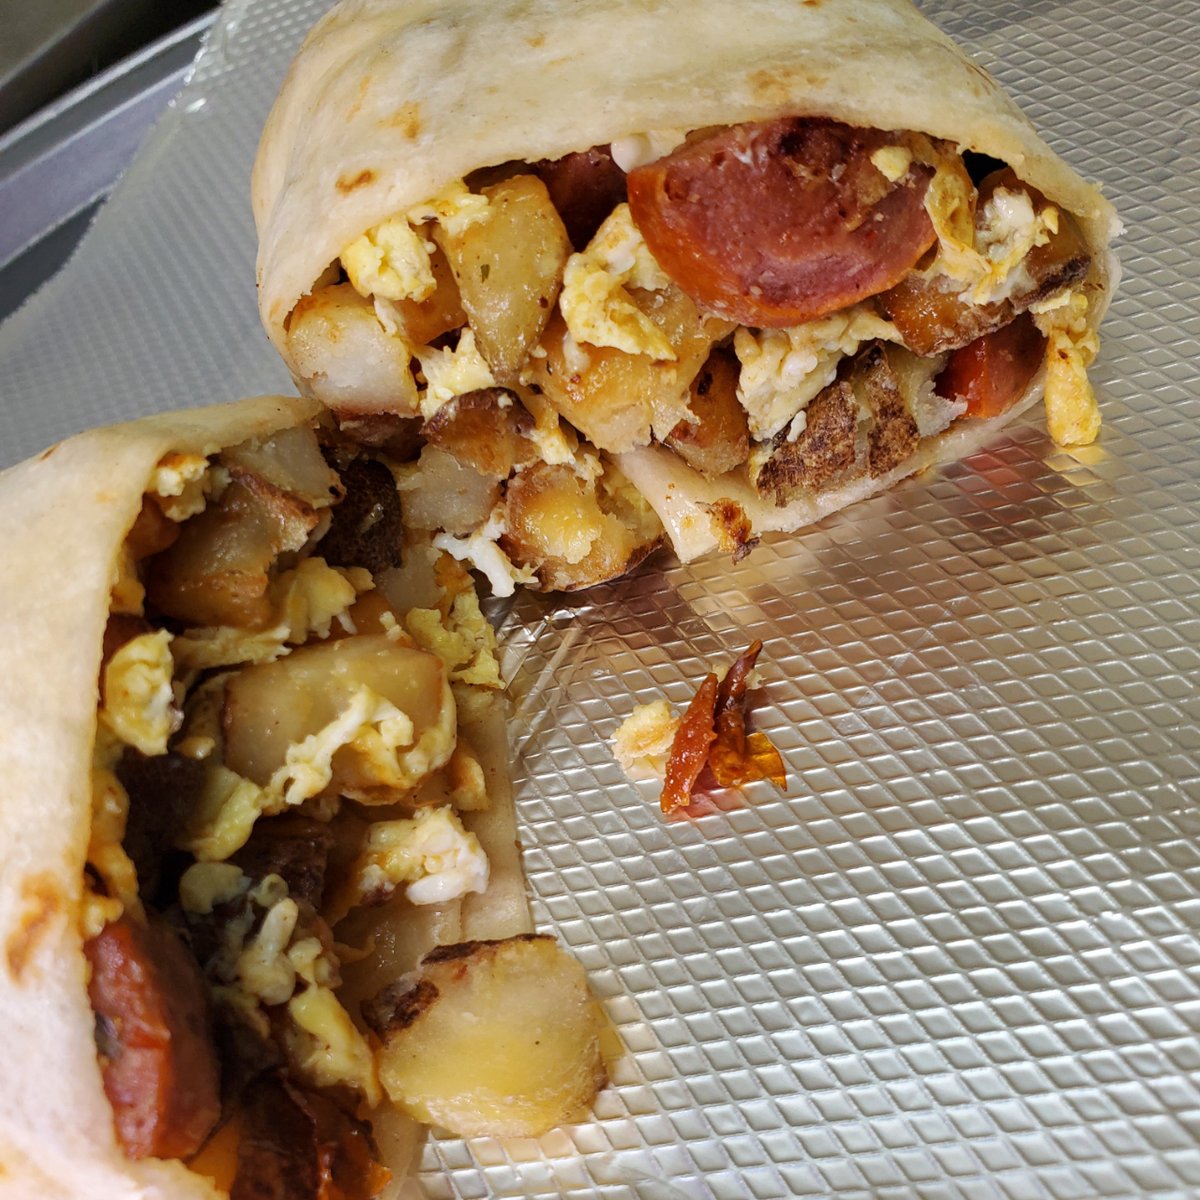 Start your day with a burst of flavor! Raul's Breakfast Burritos are packed with deliciousness to kickstart your morning! #BreakfastBurritos #MorningEats🔥🌯😋Have you tried the hot link burrito? 🔥🌯